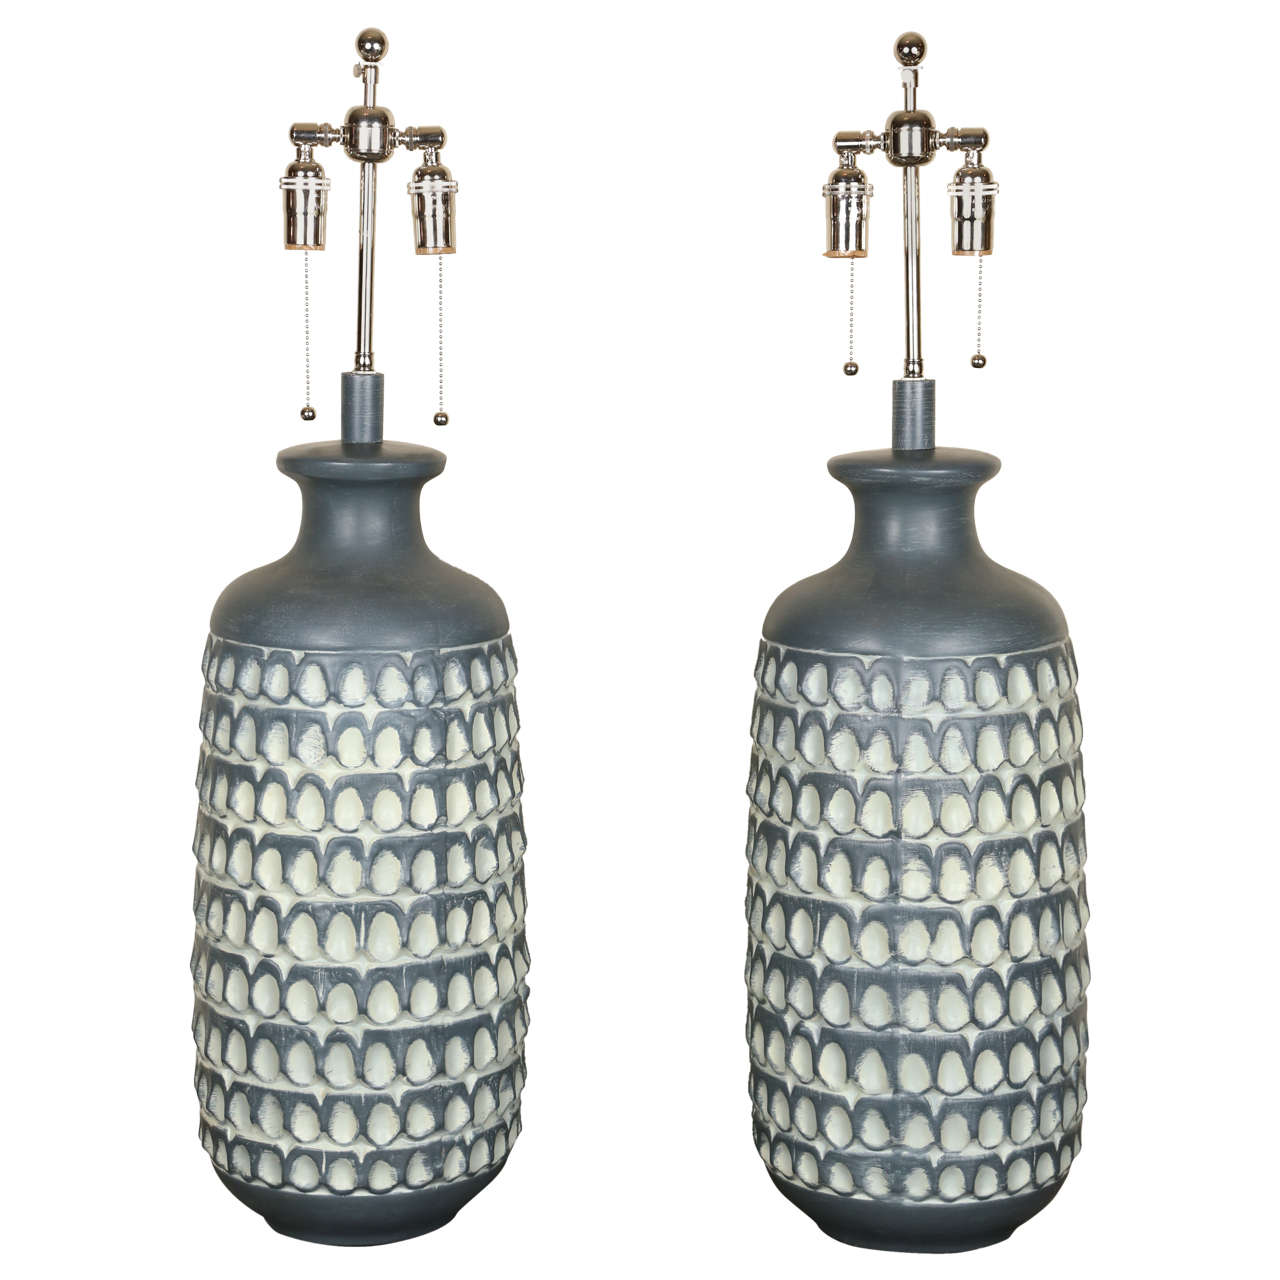 Pair of Large Matte Glazed Ceramic Lamps with Embossed Thumbprint Design